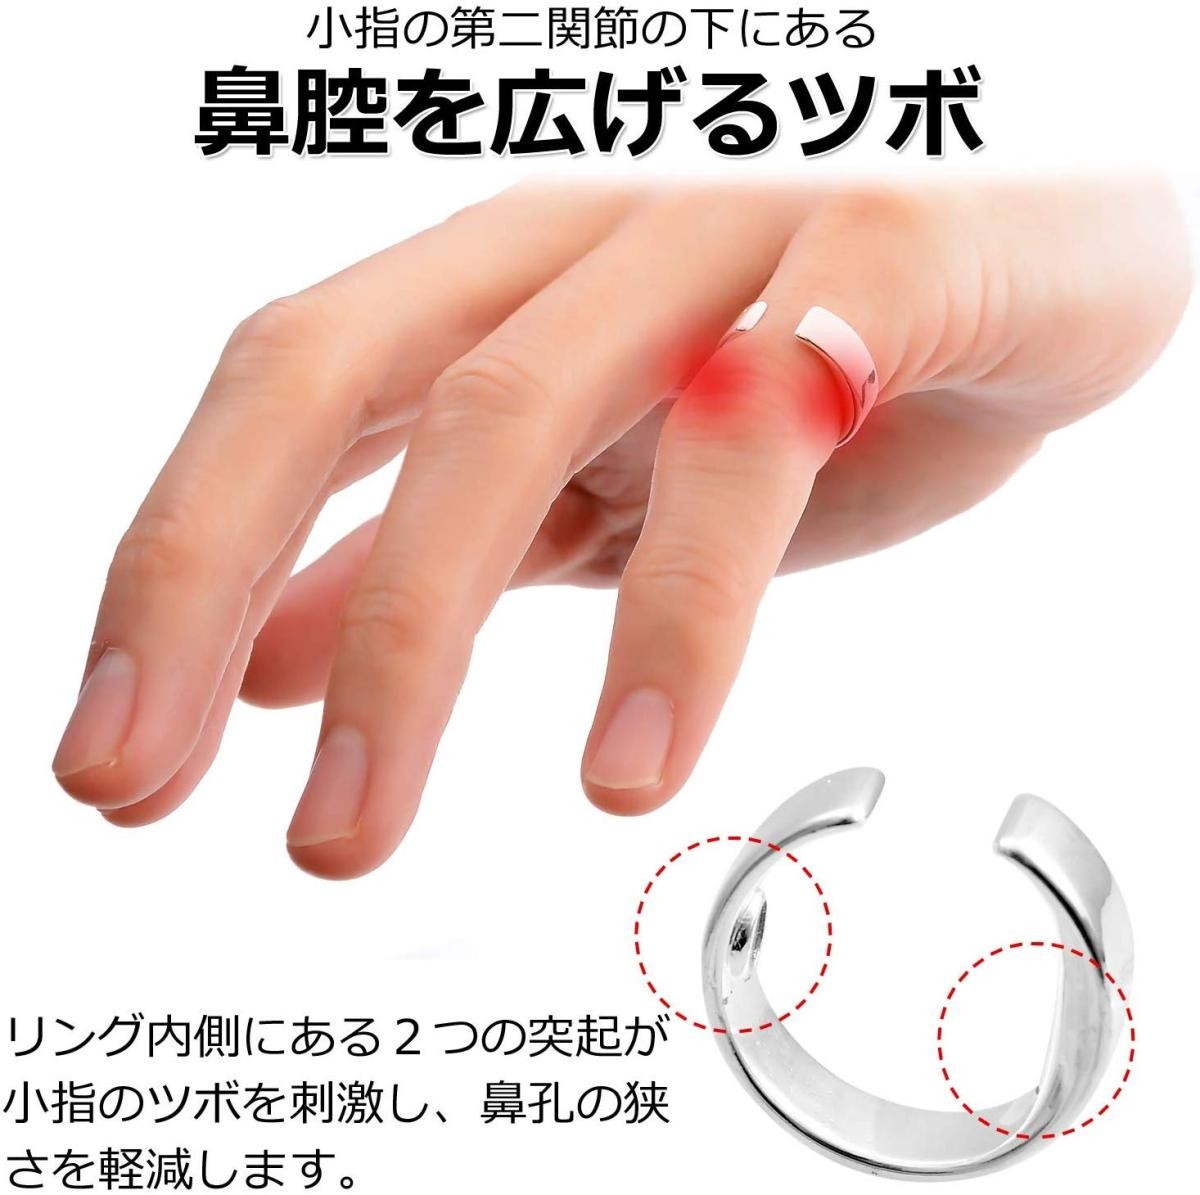  snoring prevention ring improvement reduction measures sleeping cheap . goods ring snoring + ring ibiki prevention snoring prevention goods snoring measures sleeping goods [Utiel]